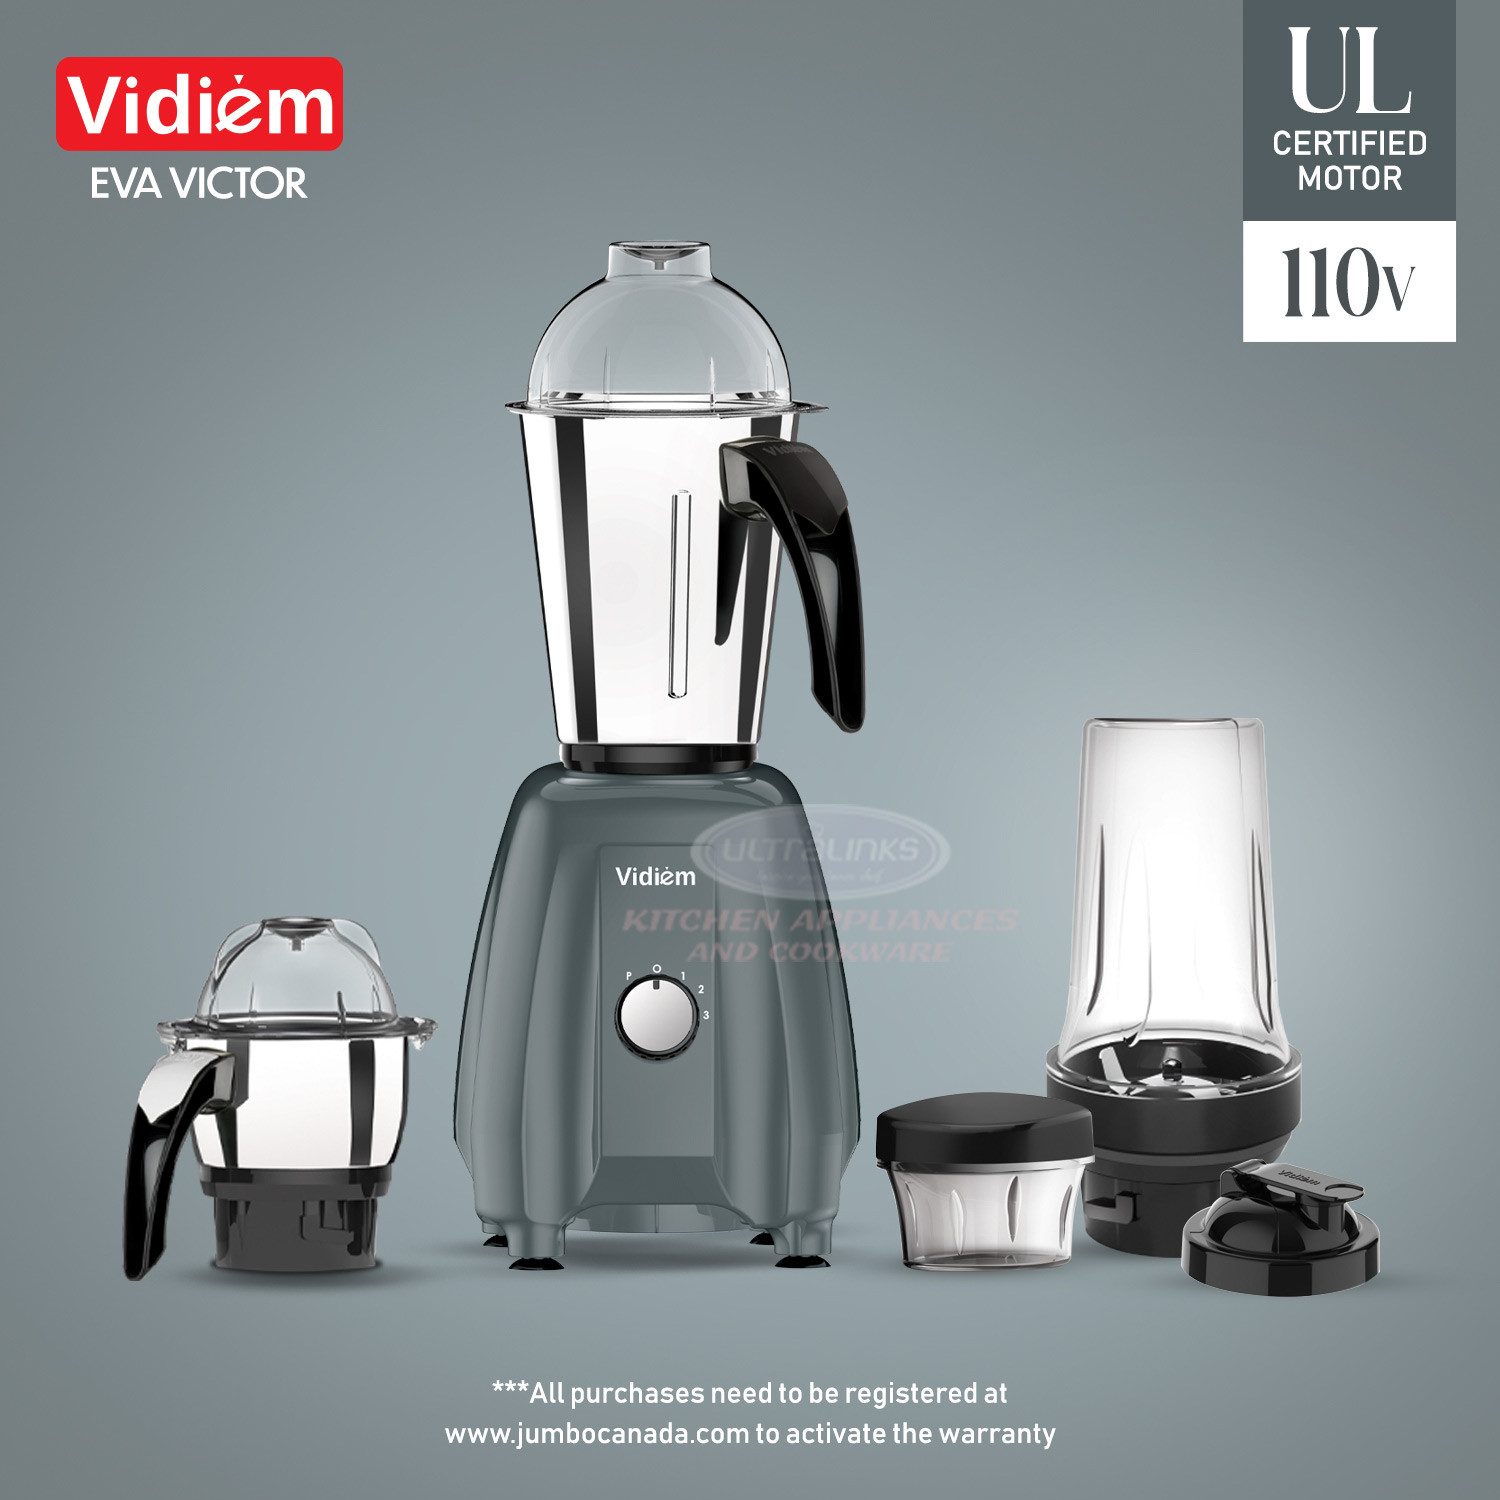 vidiem-eva-victor-pro-650w-110v-indian-mixer-grinder-ss-jars-250ml-spice-personal-coffee-herbs-grinder-with-500ml-personal-juices-shakes-smoothie-blender-made-for-canada-usa8